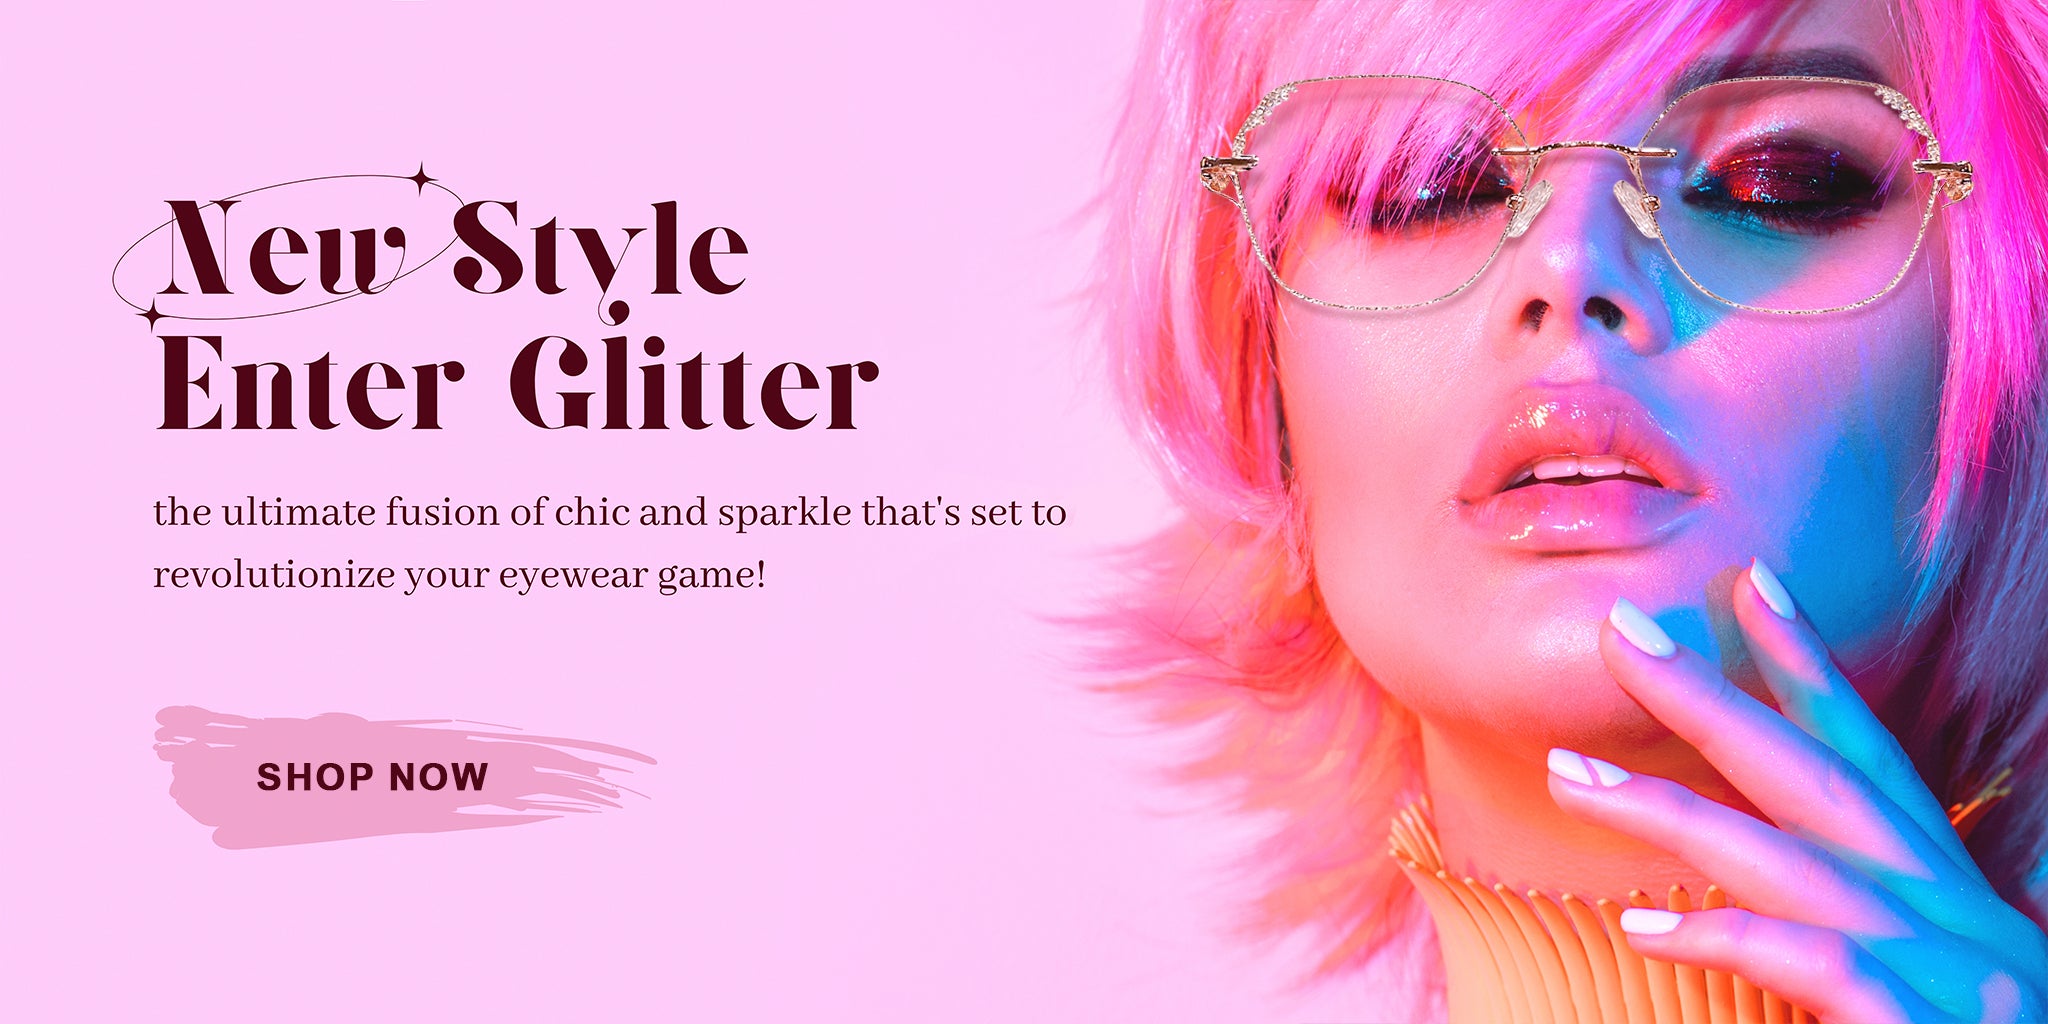 New Women Eyeglasses Recommendation: Glitter For Style Upgrade for the Fashion Forward Queen